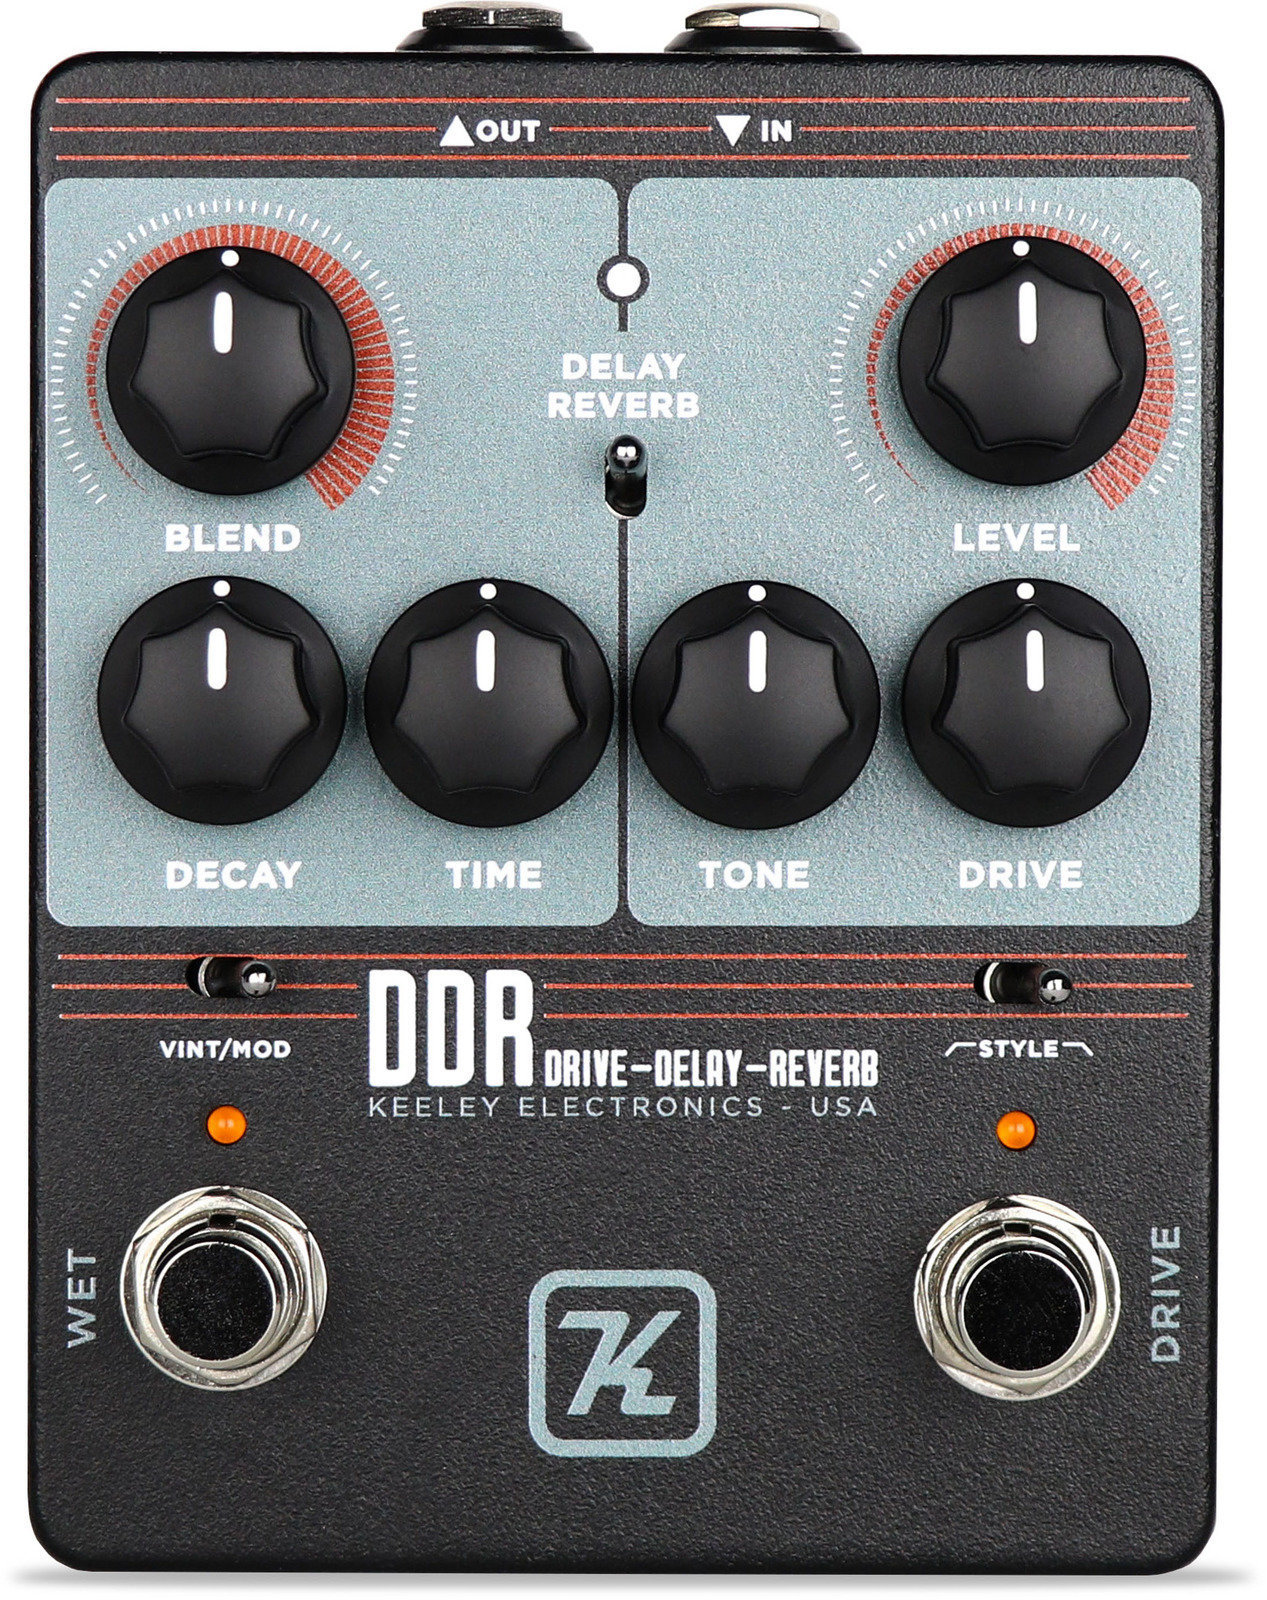 Keeley DDR Drive Delay Reverb Keeley